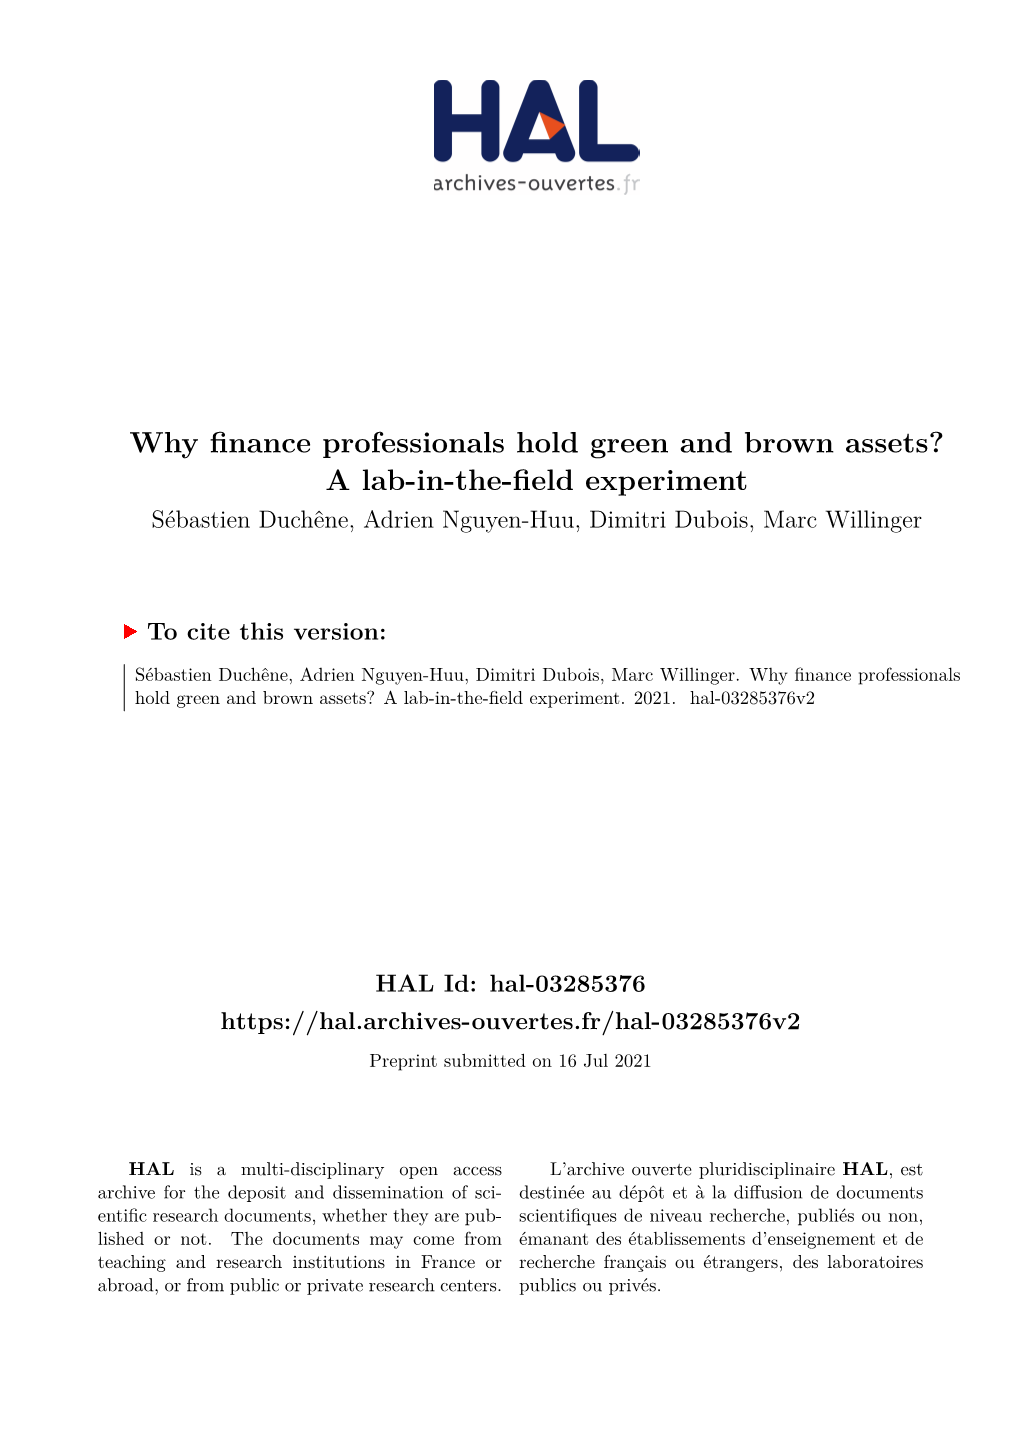 Why Finance Professionals Hold Green and Brown Assets? a Lab-In-The-Field Experiment Sébastien Duchêne, Adrien Nguyen-Huu, Dimitri Dubois, Marc Willinger